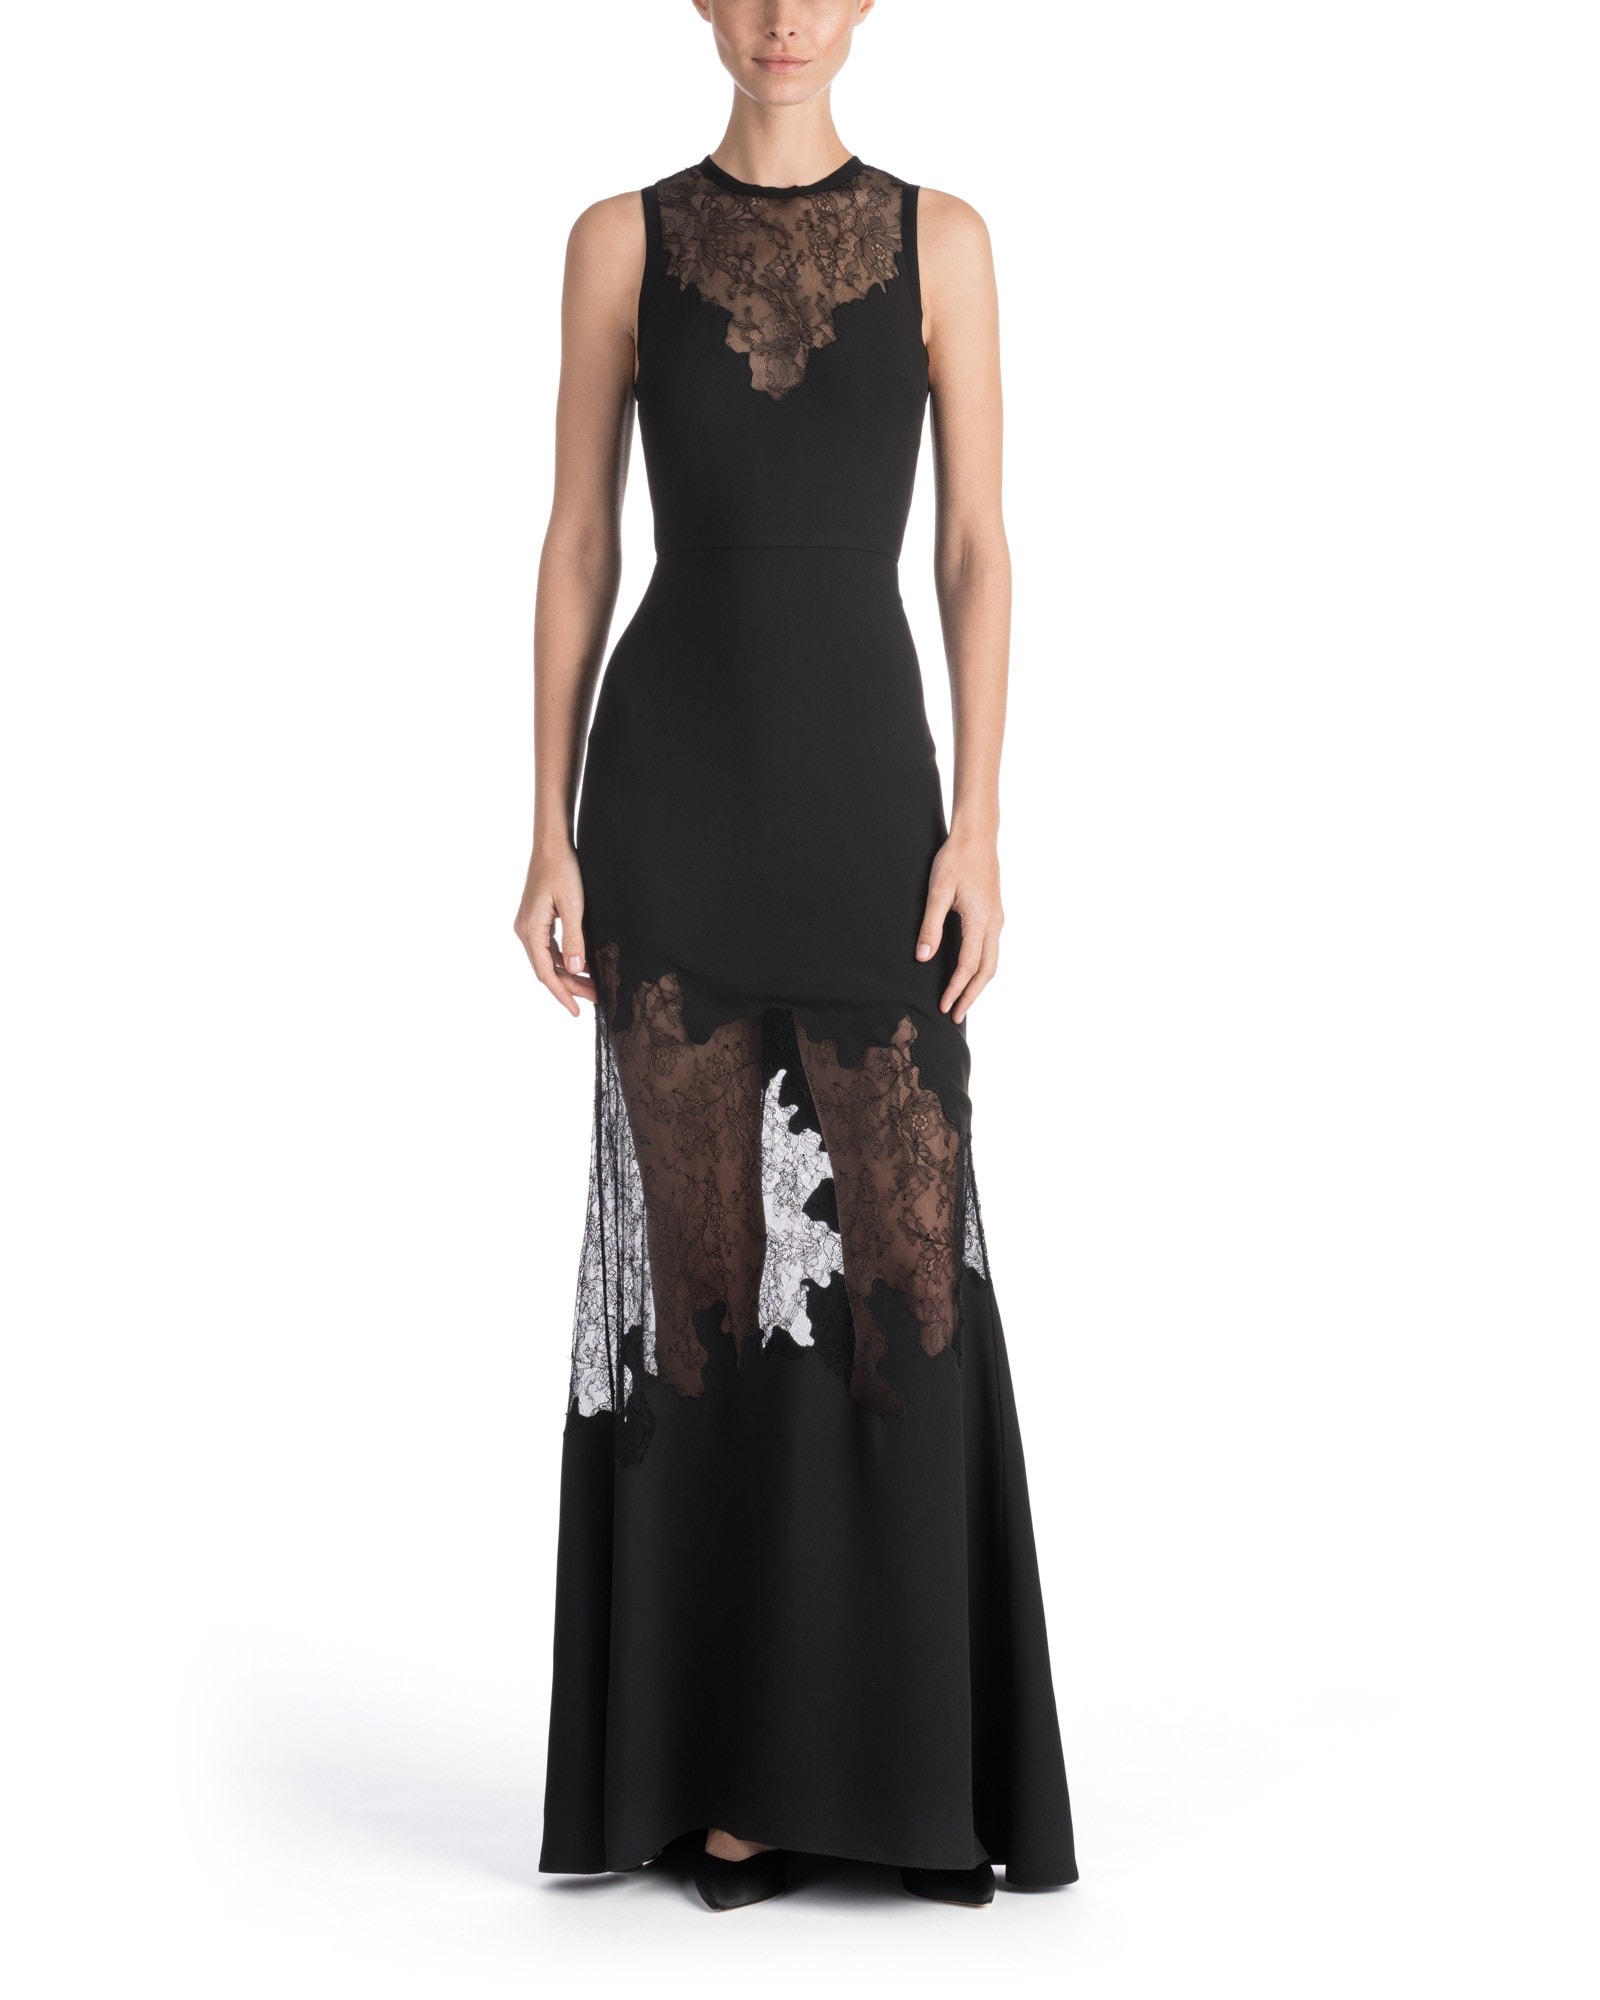 LACE CUT OUT EFFECT SLEEVELESS GOWN